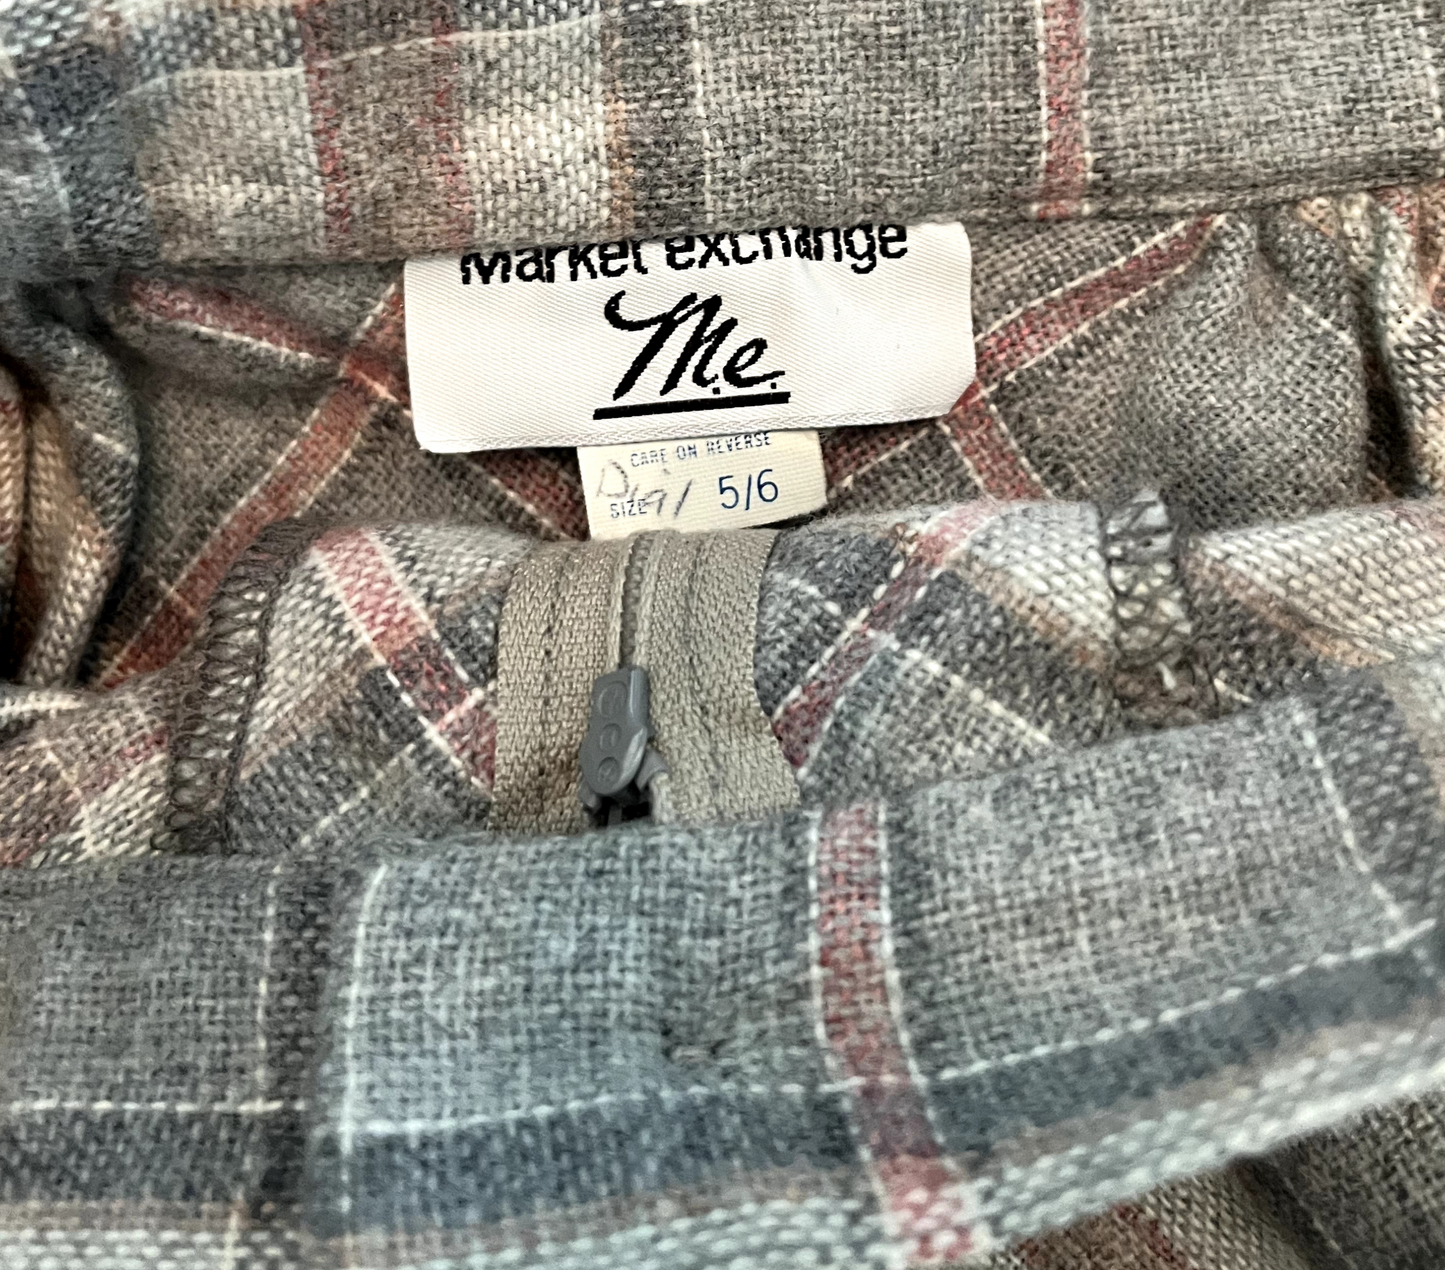 Vintage ladies 7/8ths plaid skirt in pink, grey and white with front zipper and button on white background closeup image of sewn in label.